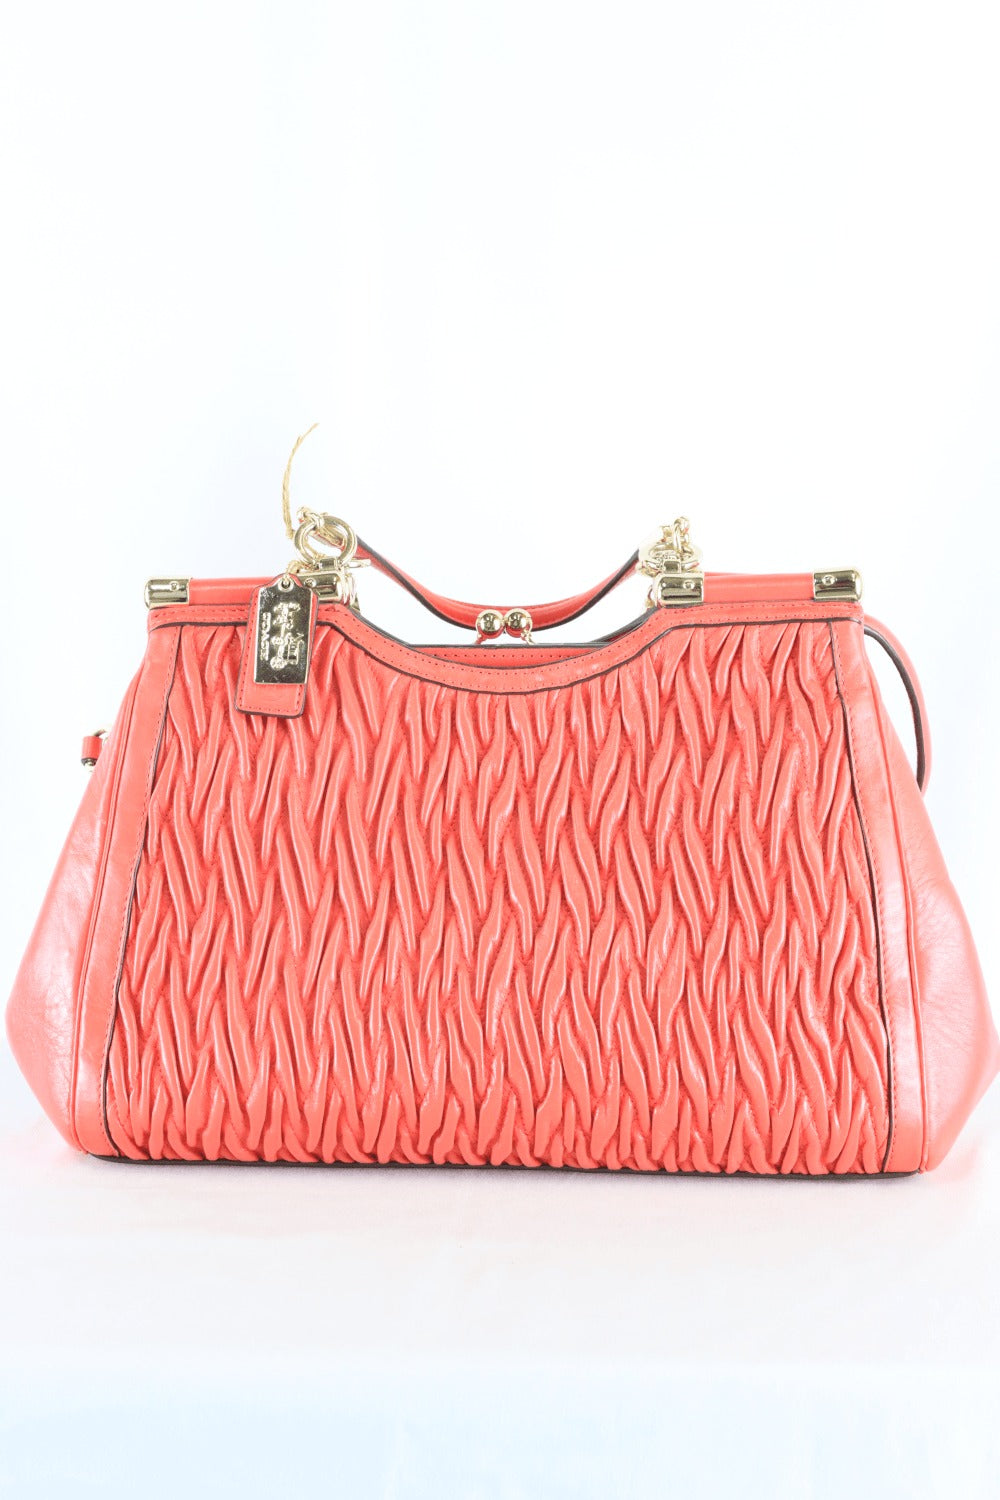 Coach Red Gathered Twisted Leather Bag